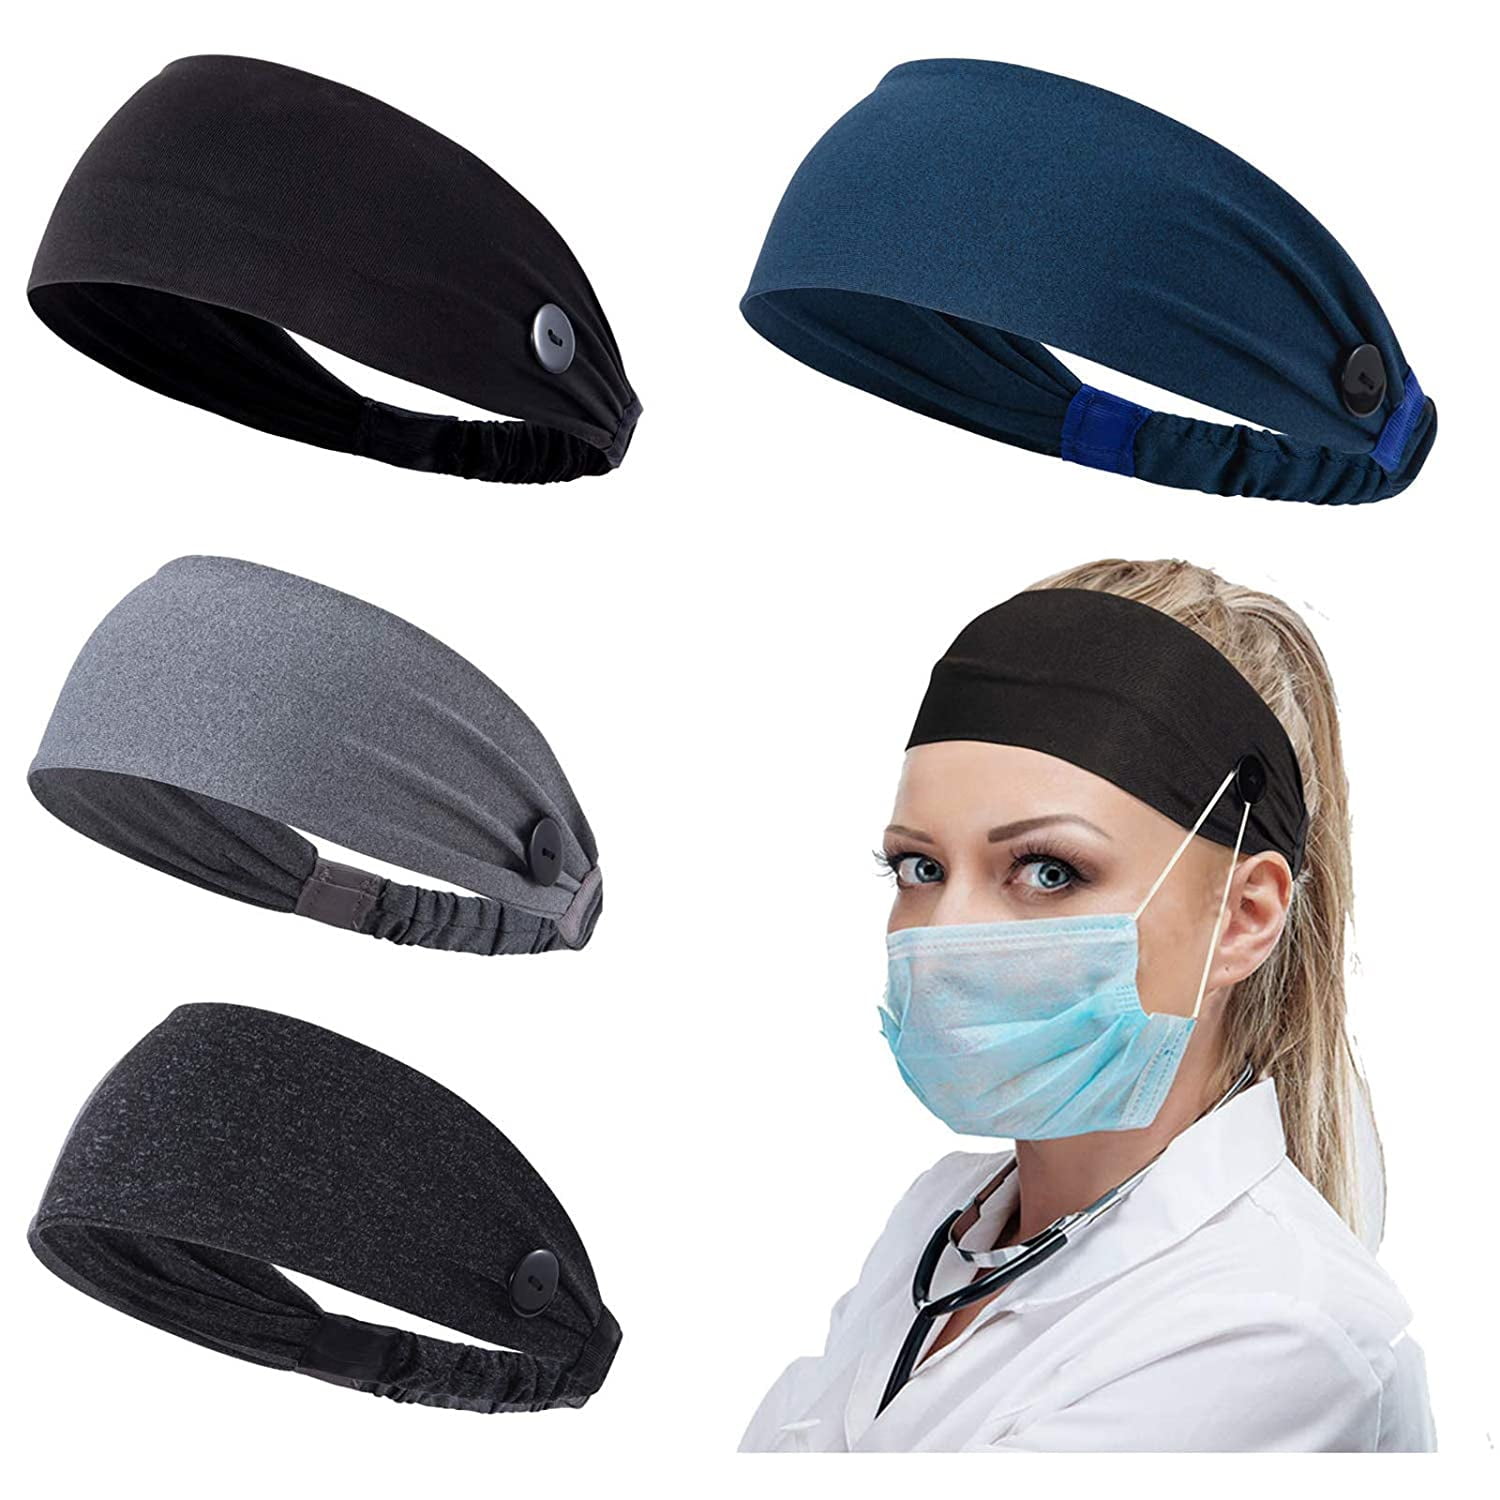 8 Piece Button Headbands Set TANOKY Sweat-Wicking Elastic Headbands with Button Ear Protection Holder Headband for Nurse Adults Face Covers Holder Outdoor Activities 8 Pcs 